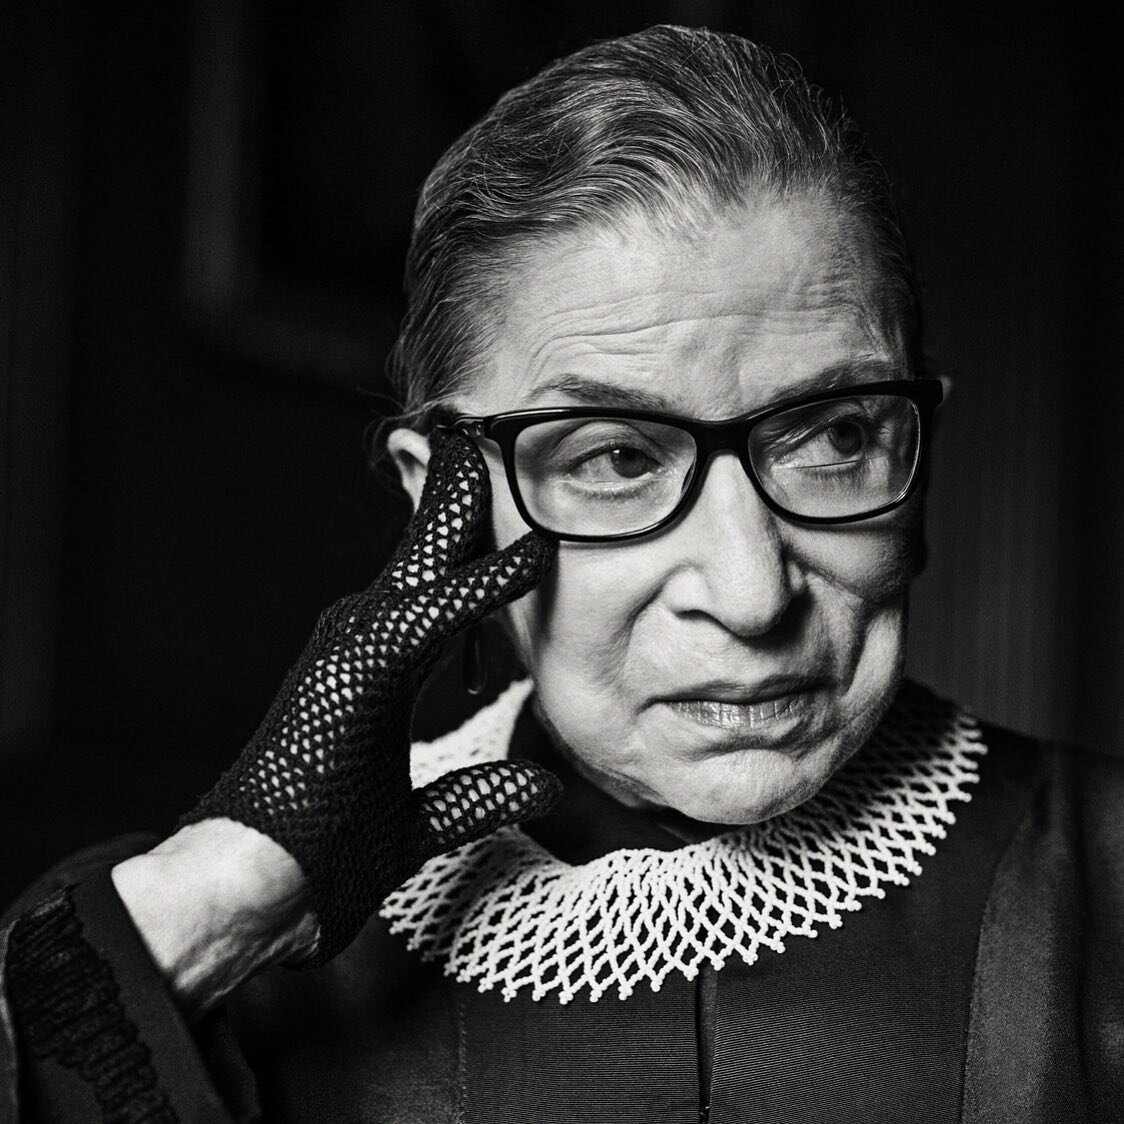 Who are you grateful for? Ruth Bader Ginsburg, for her understanding of compassion, respect and friendship a true humanist.
Happy Thanksgiving!